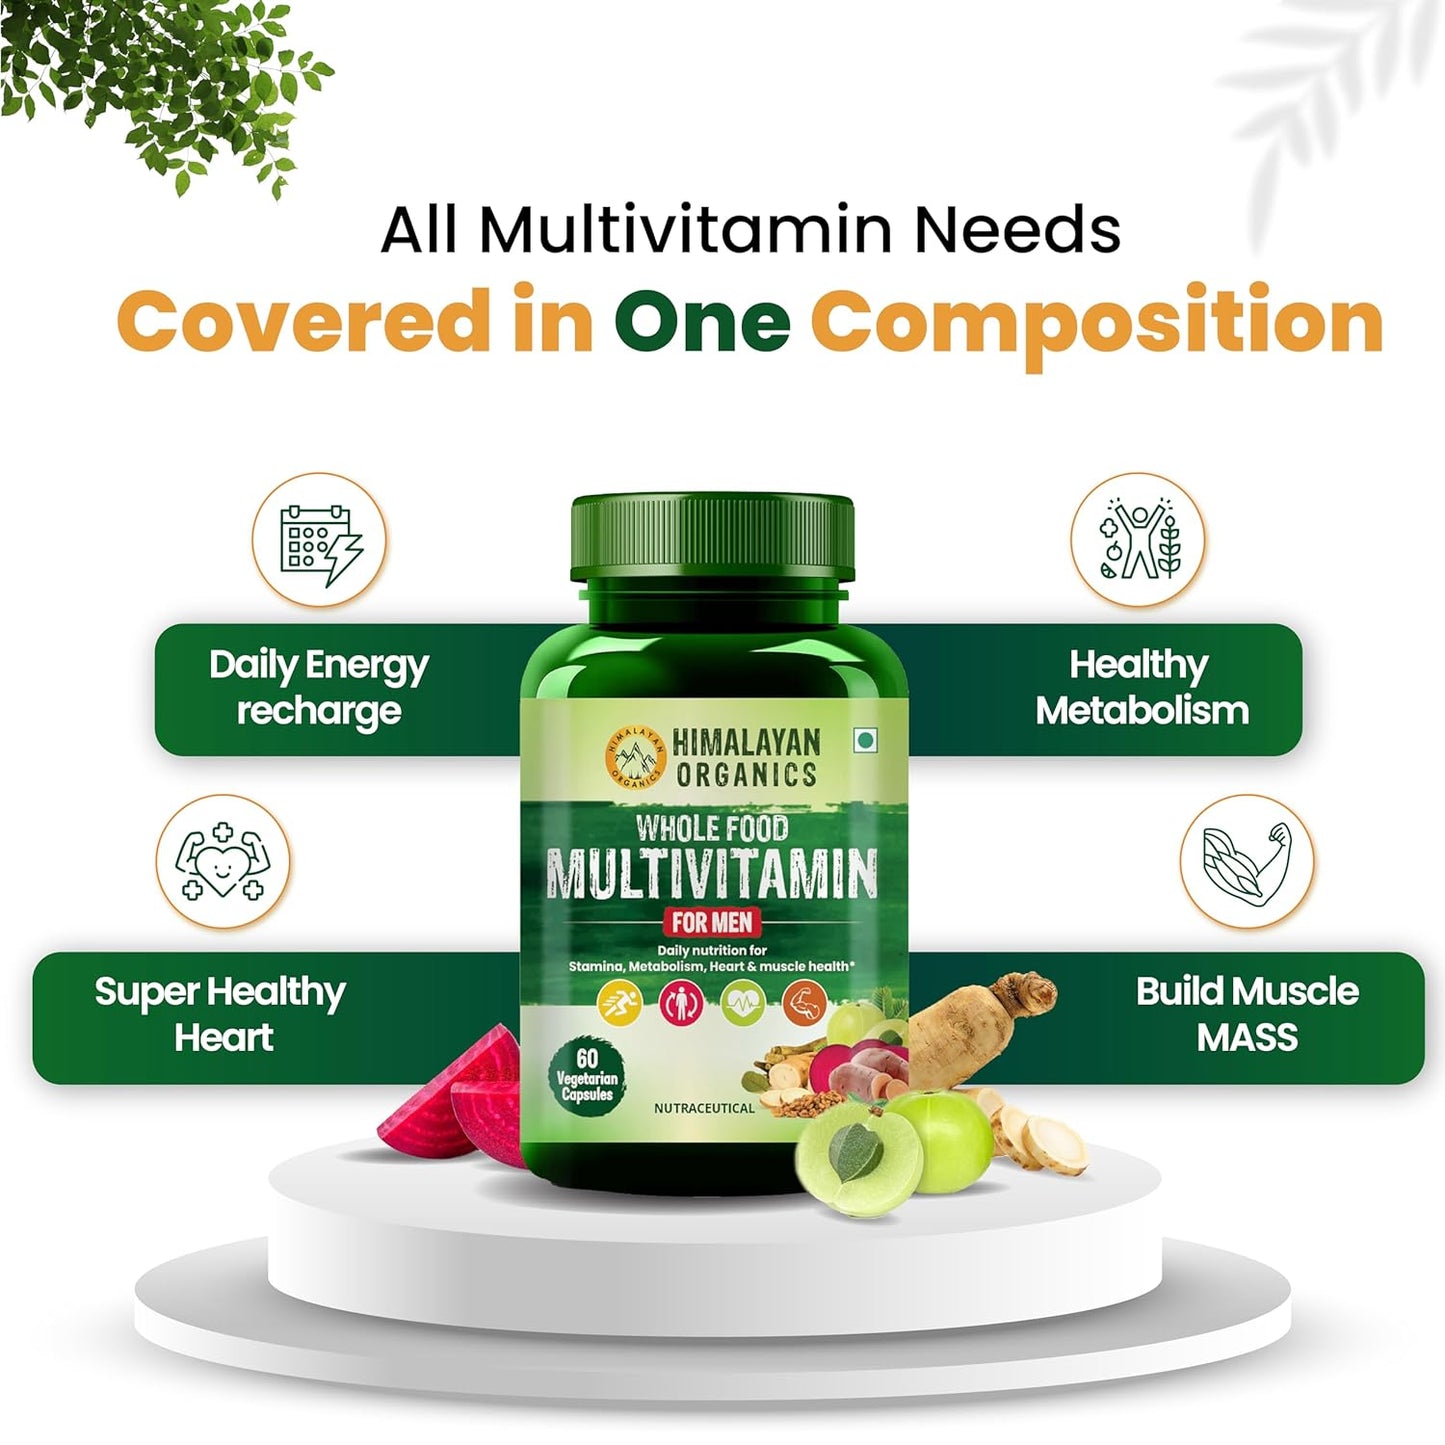 Himalayan Organics Whole Food Multivitamin for Men with Vitamins, Minerals, Extracts | For Energy, Brain, Heart Health & Eye Health - 60 Veg Capsules